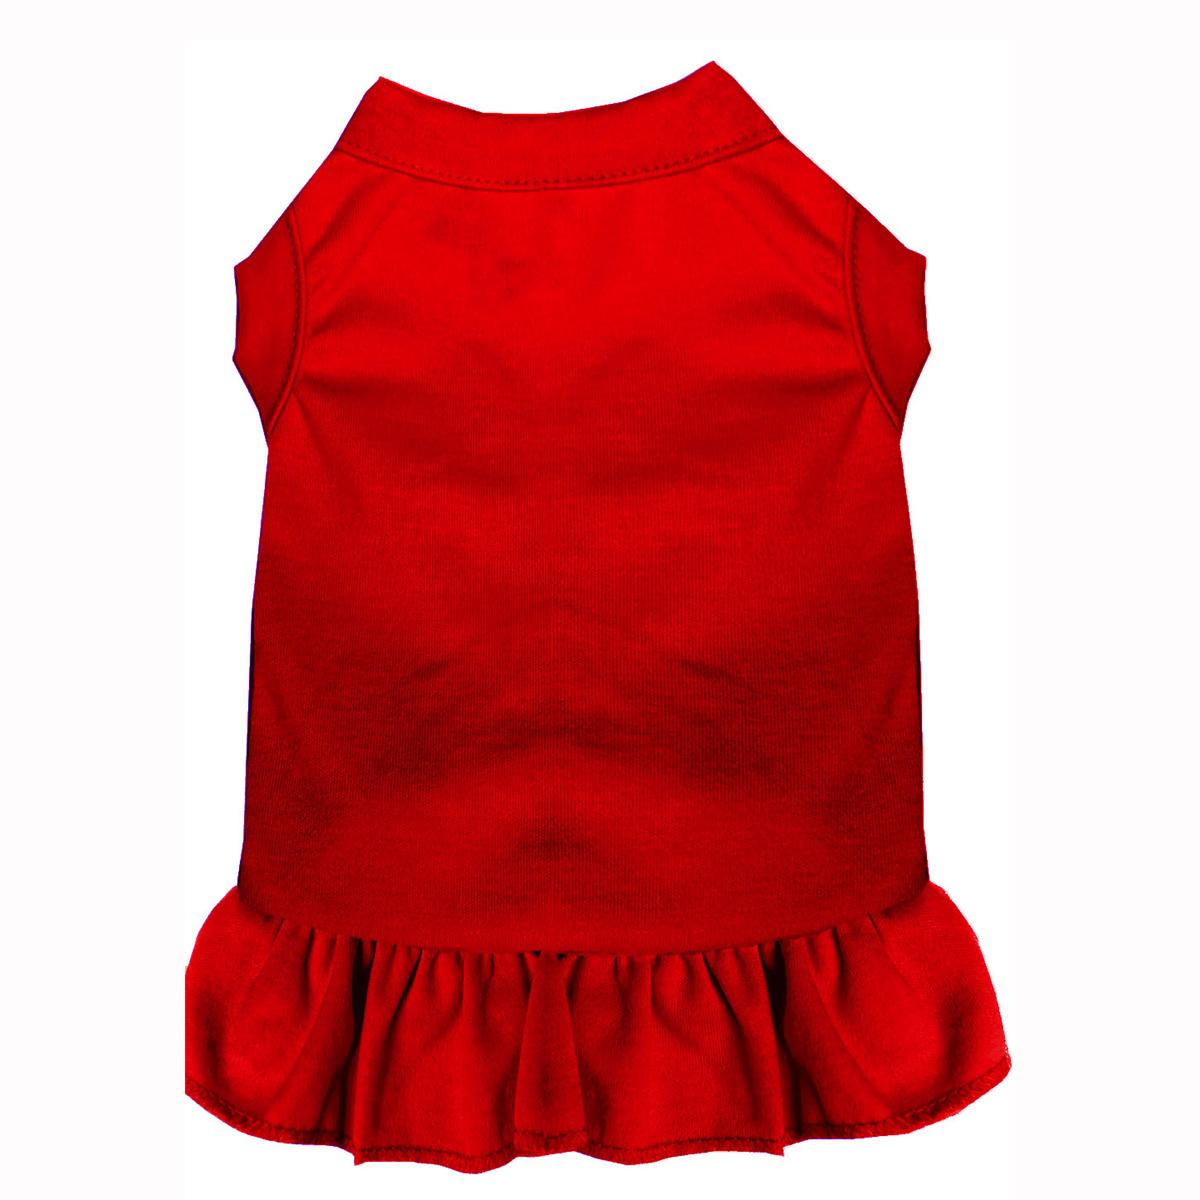 Plain Dog and Cat Dress - Red